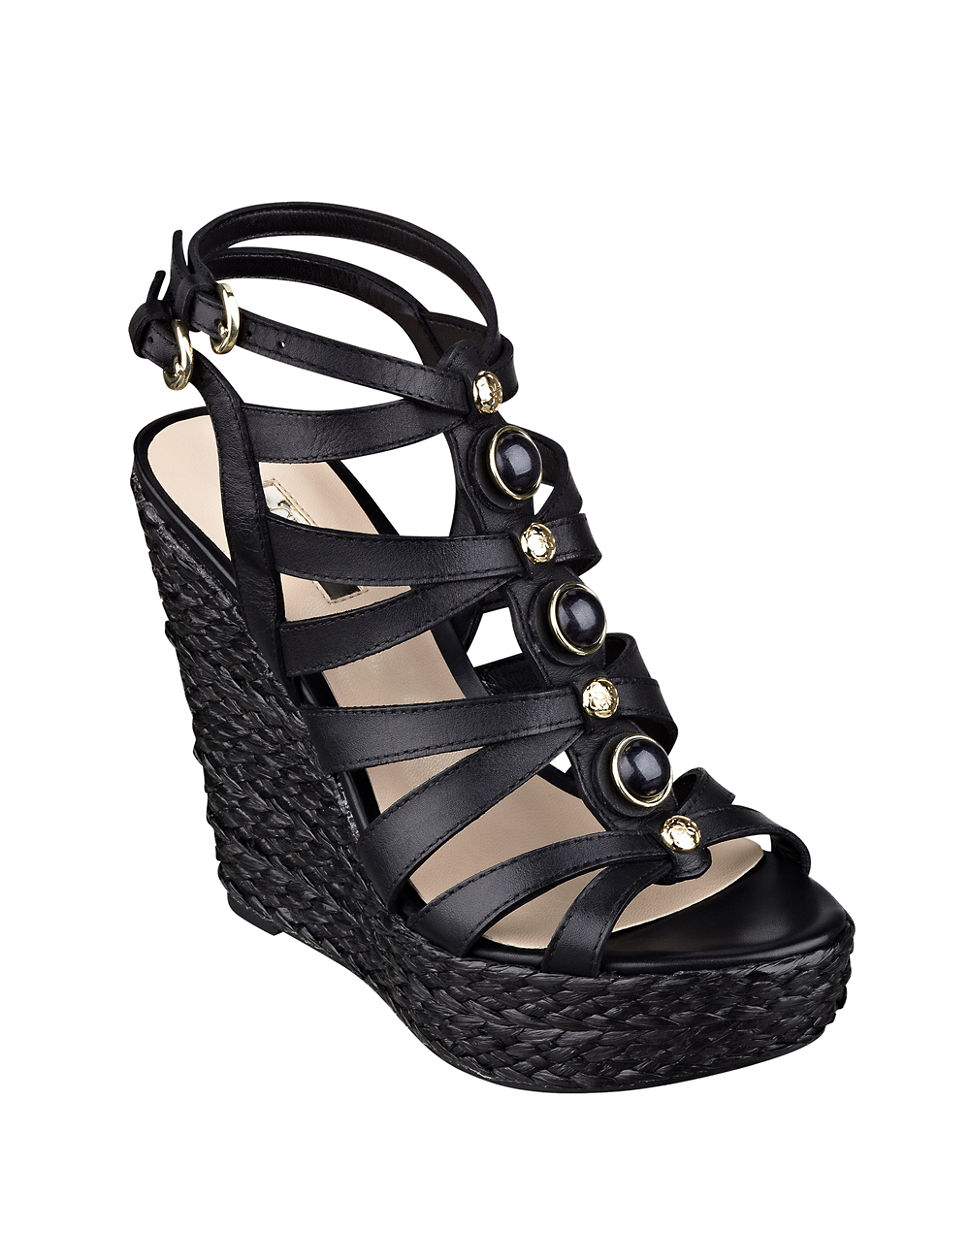 Lyst - Guess Onixx Leather Wedge Sandals in Black